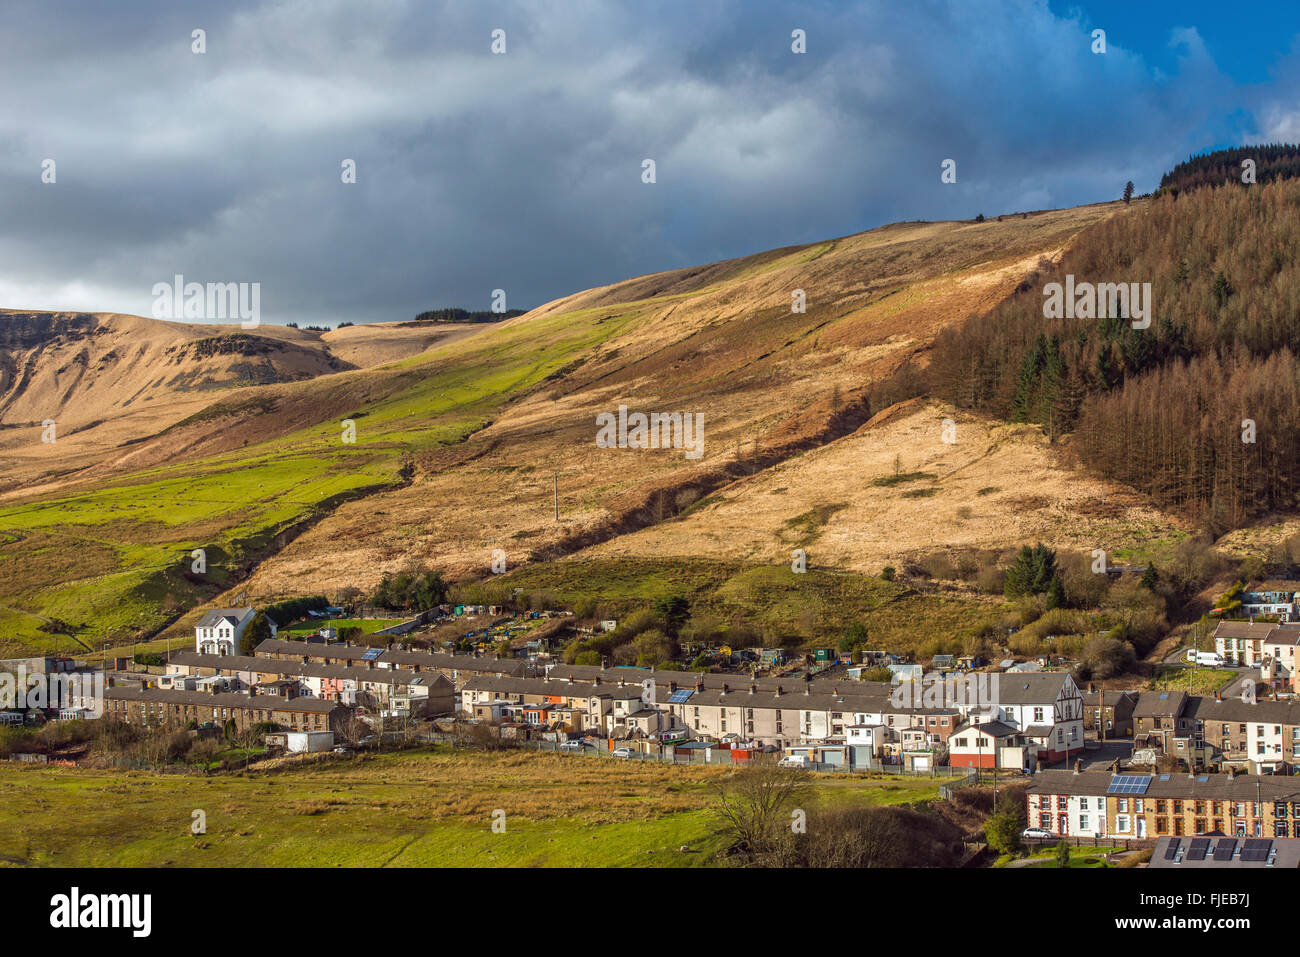 The little old coal mining village of Cwmparc, nestled under the hills surrounding the Rhondda Valley, south Wales. Stock Photo